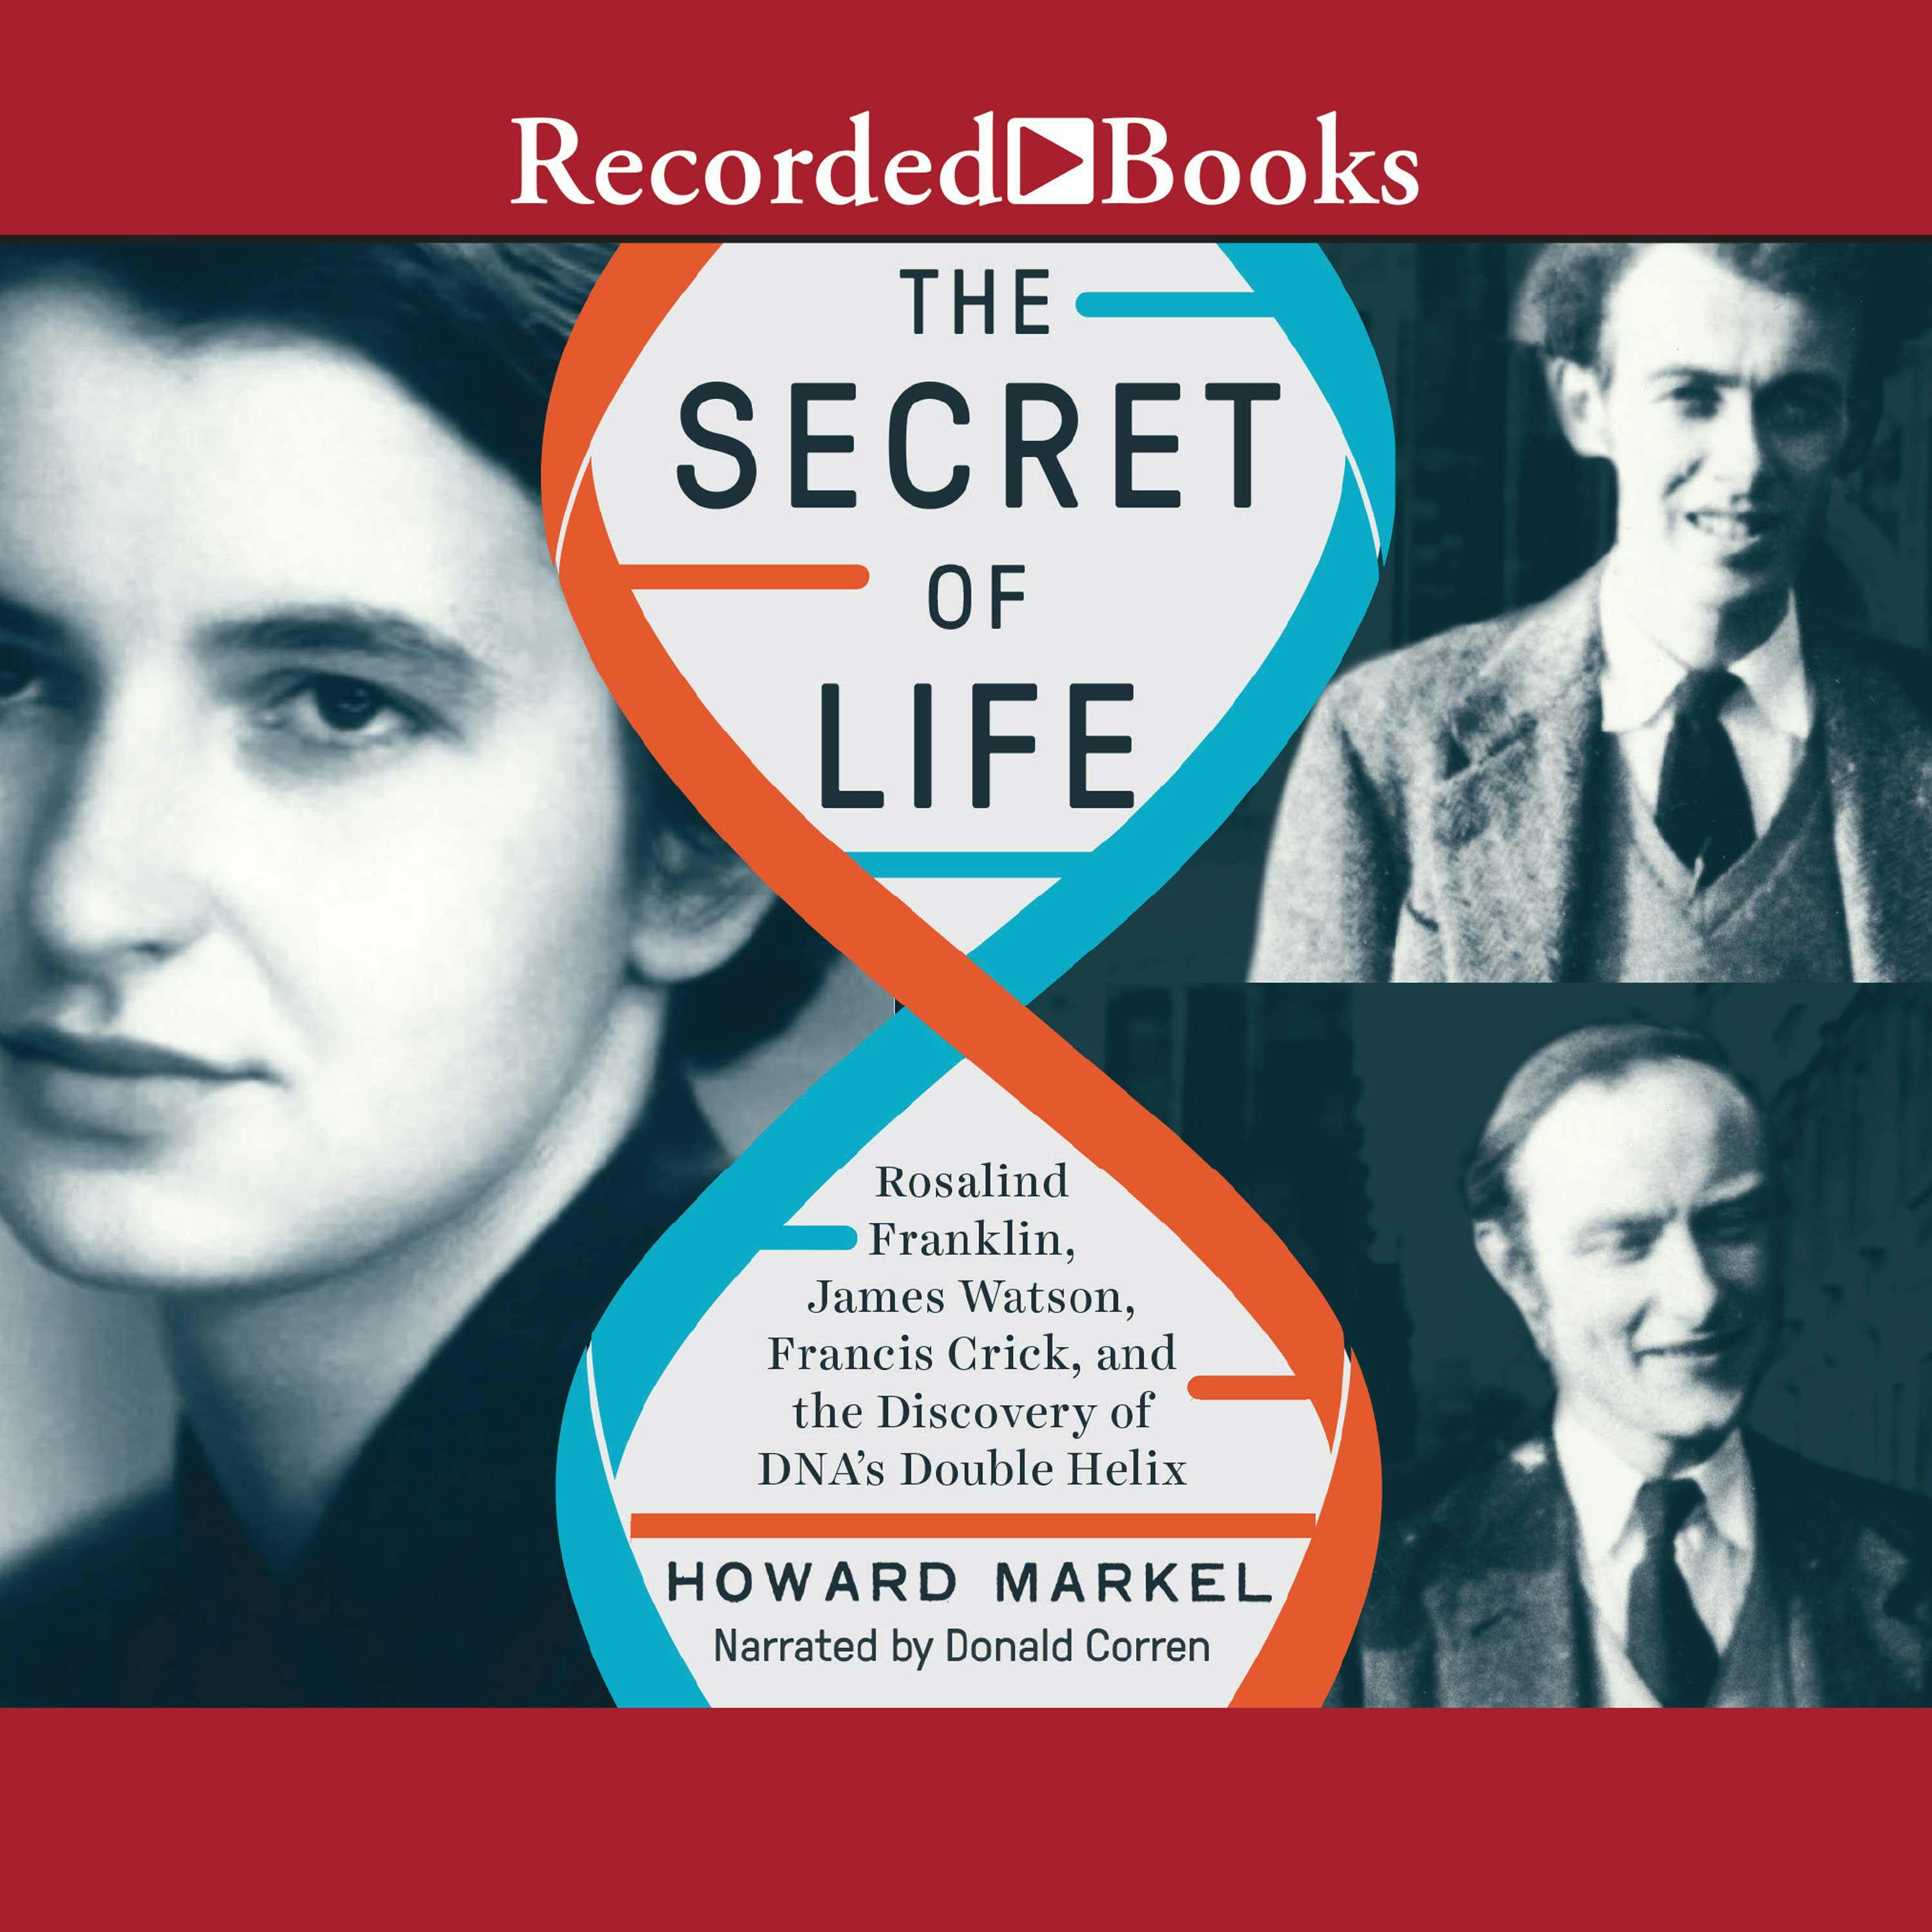 The Secret of Life: Rosalind Franklin, James Watson, Francis Crick, and the Discovery of DNA's Double Helix - undefined